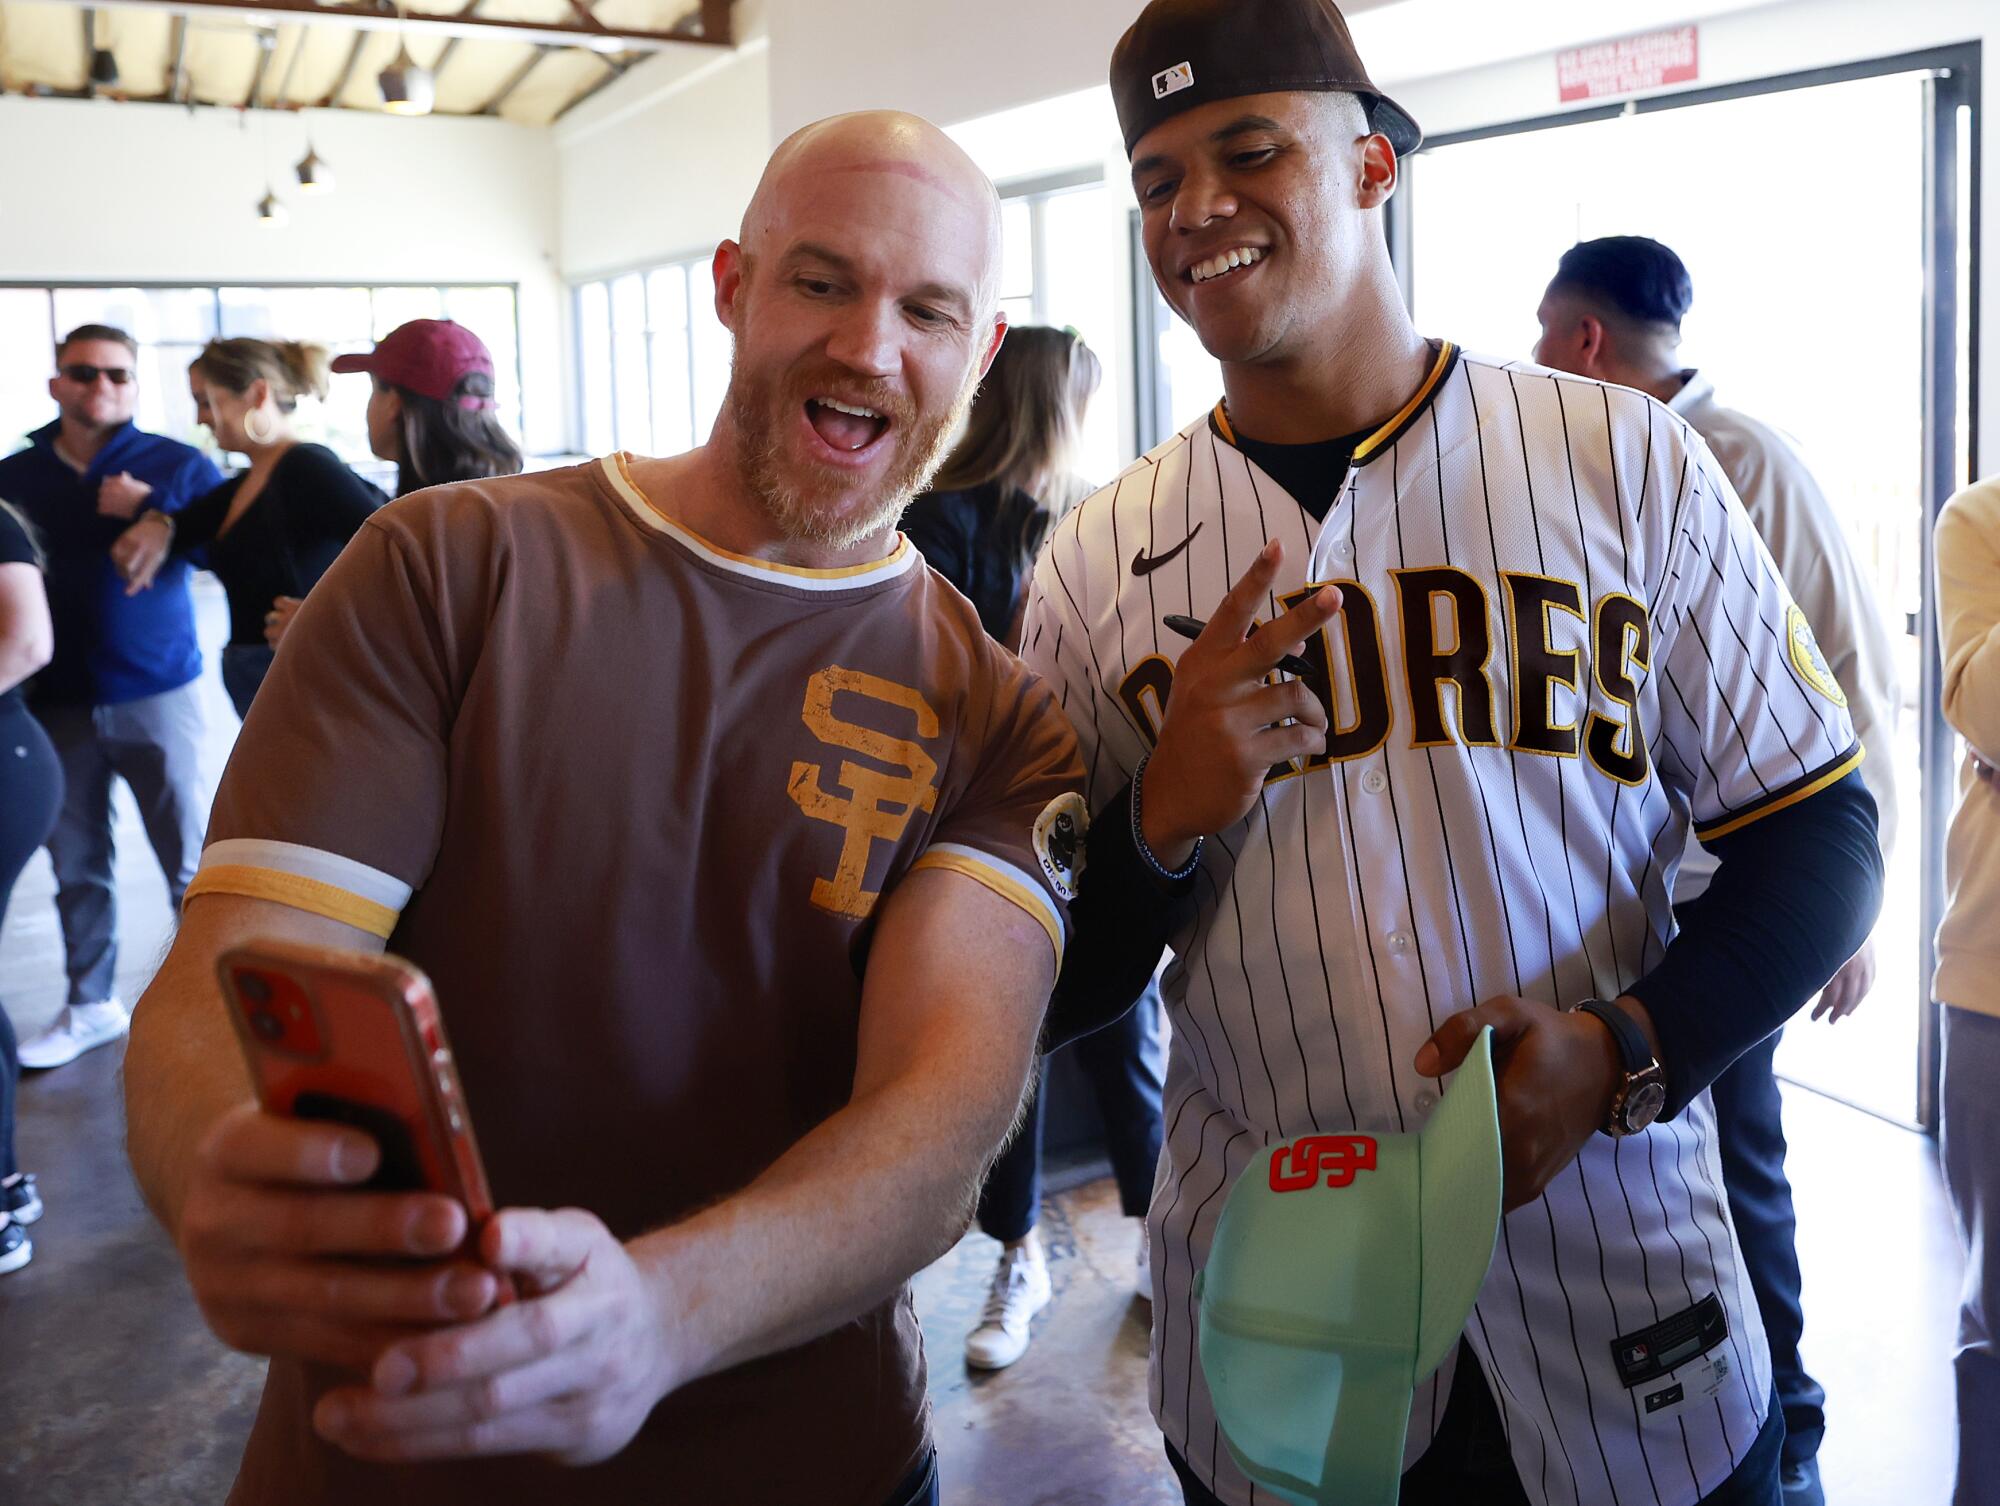 10 Year Campaign Made Padres 'Bring Back The Brown' – Westside Love